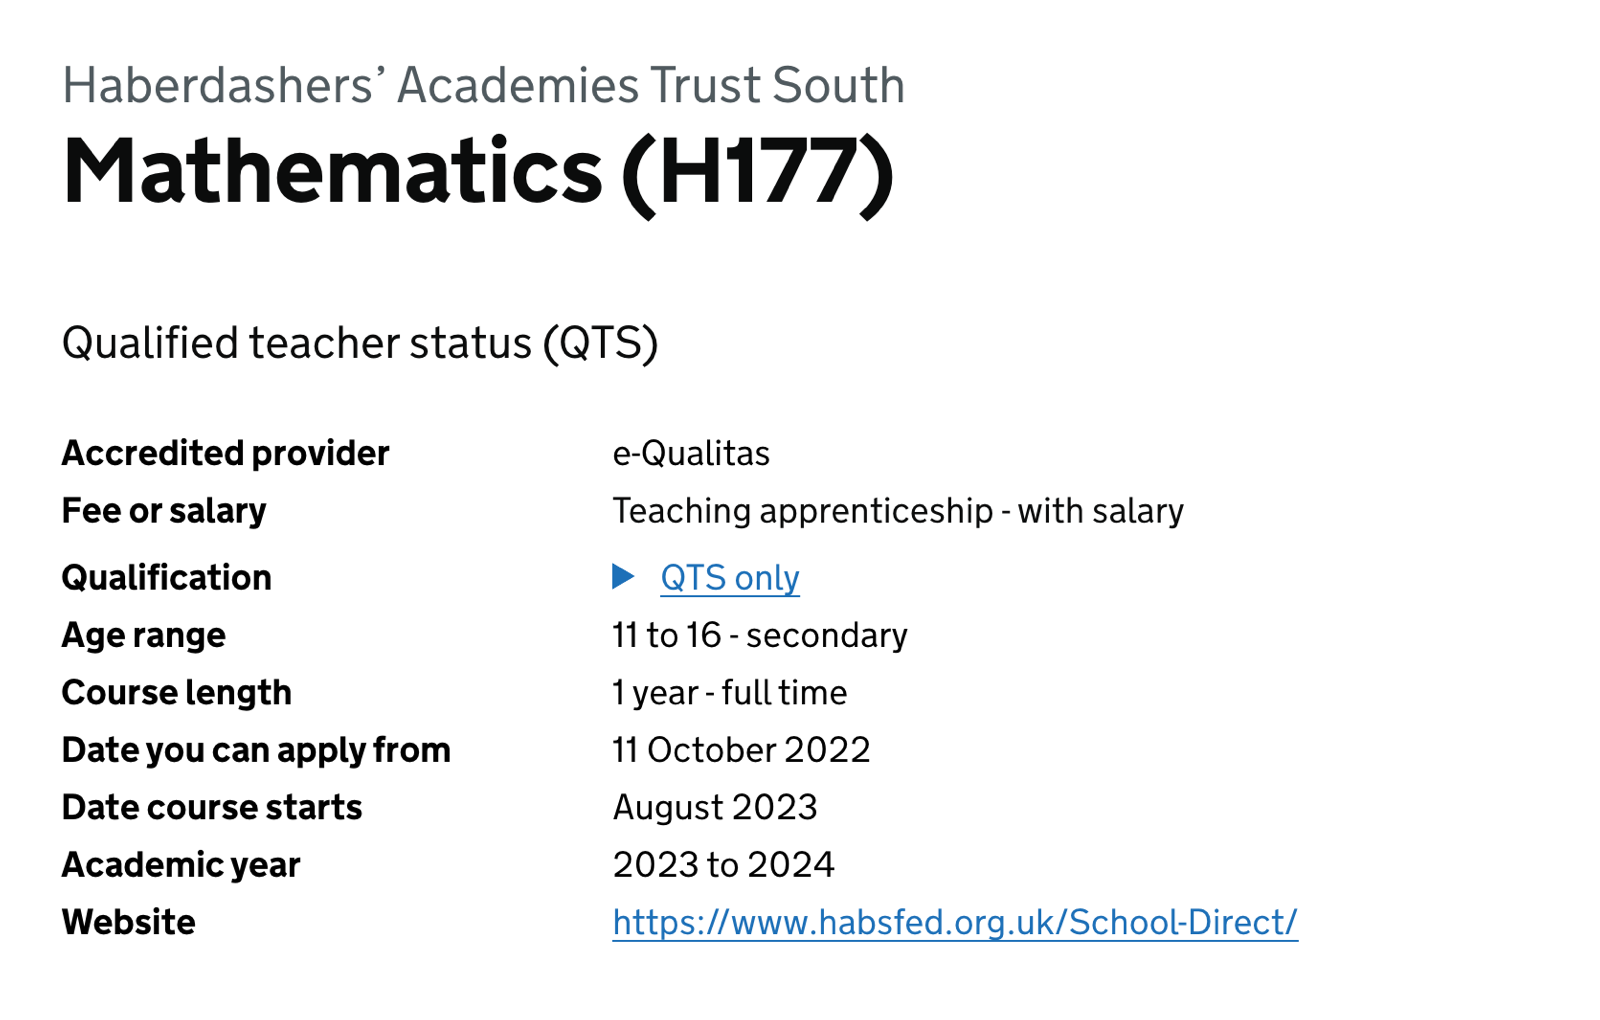 Course summary details showing teaching apprenticeship funding type